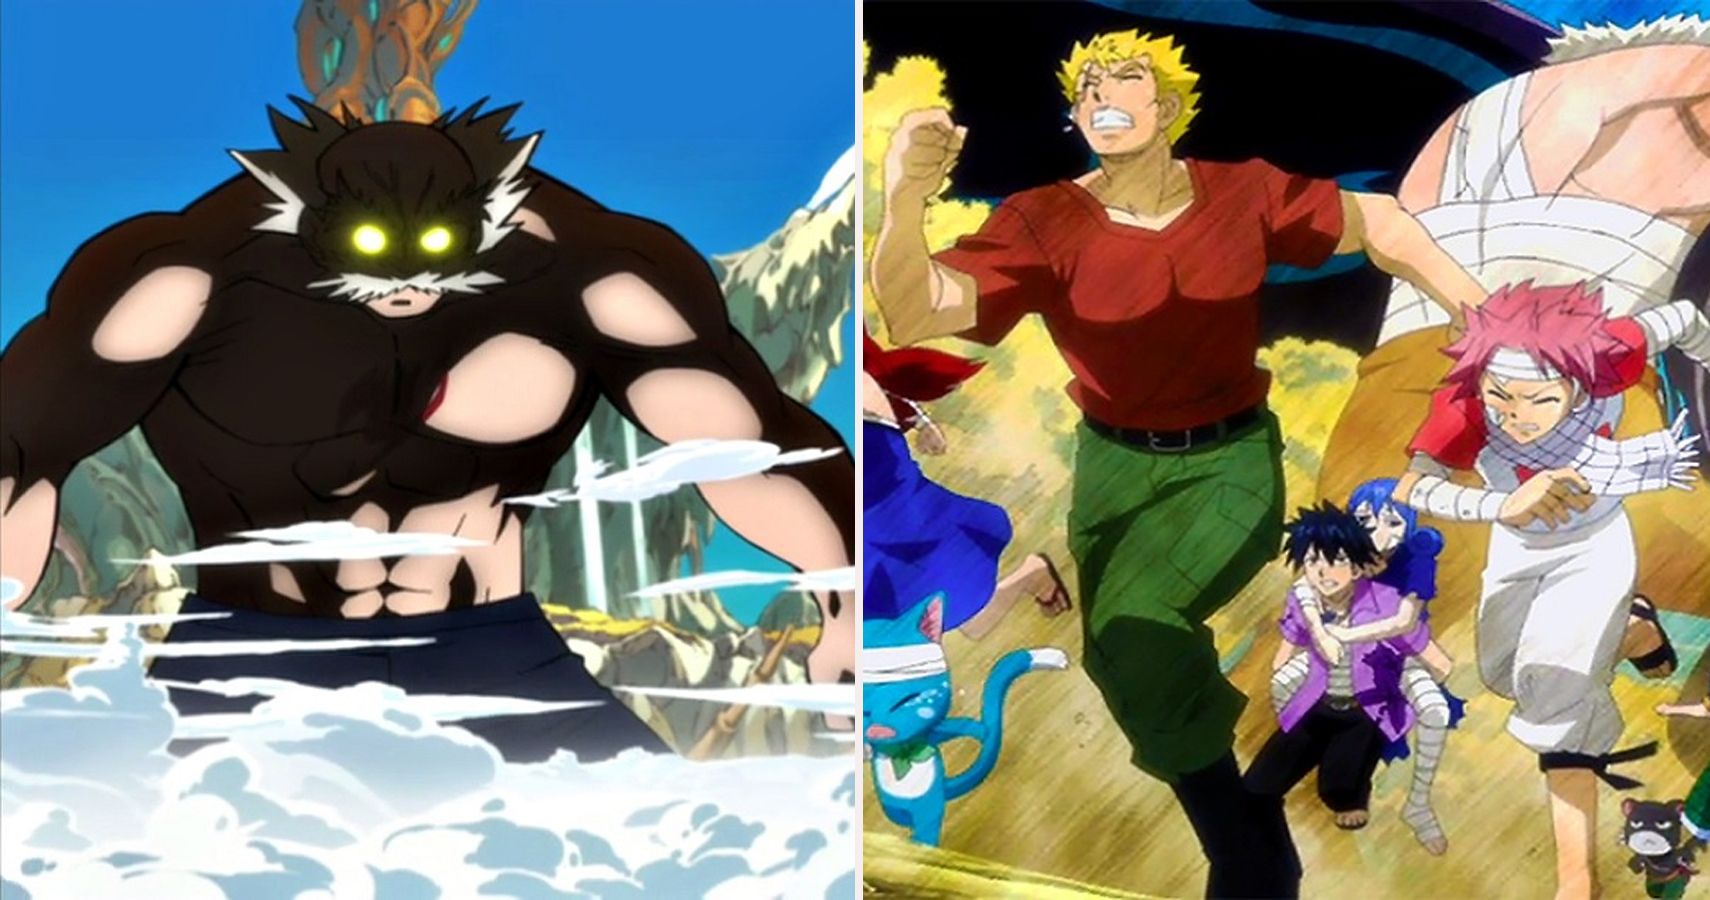 The Best Story Arcs In Fairy Tail, Ranked